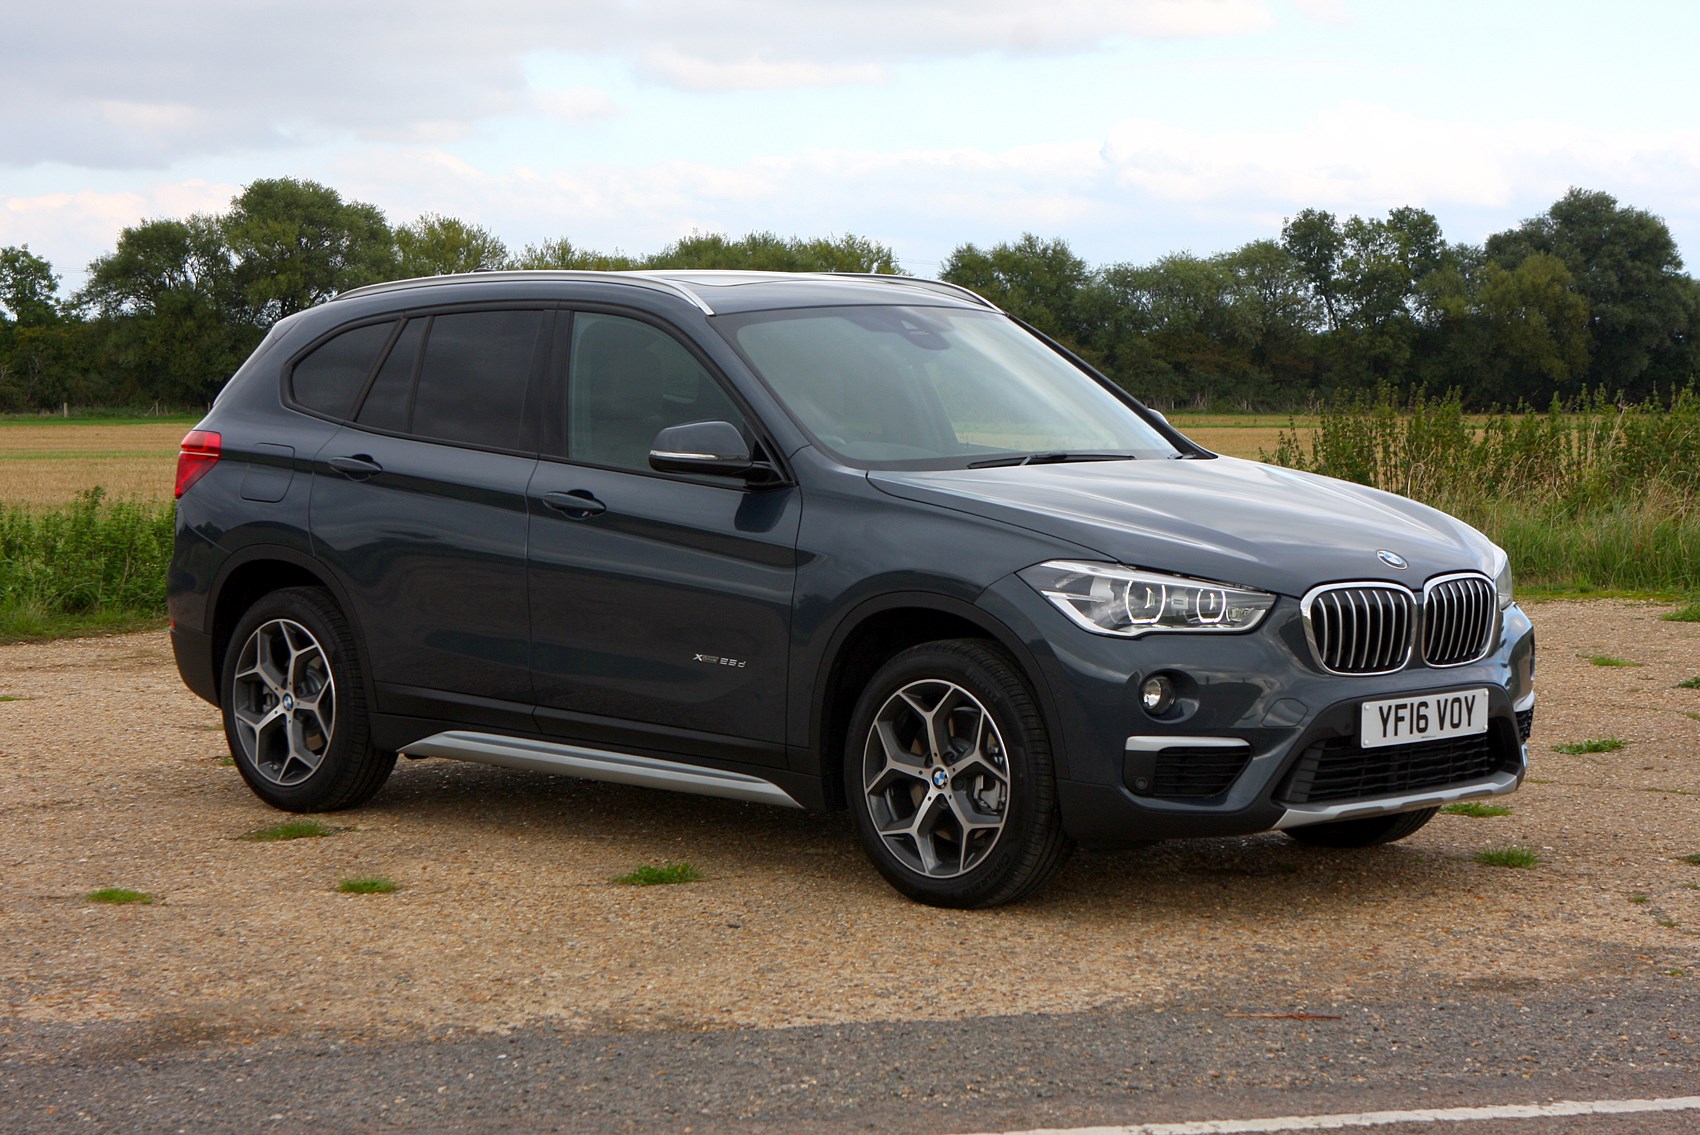 BMW X1 SUV (2015 - ) Features, Equipment and Accessories | Parkers